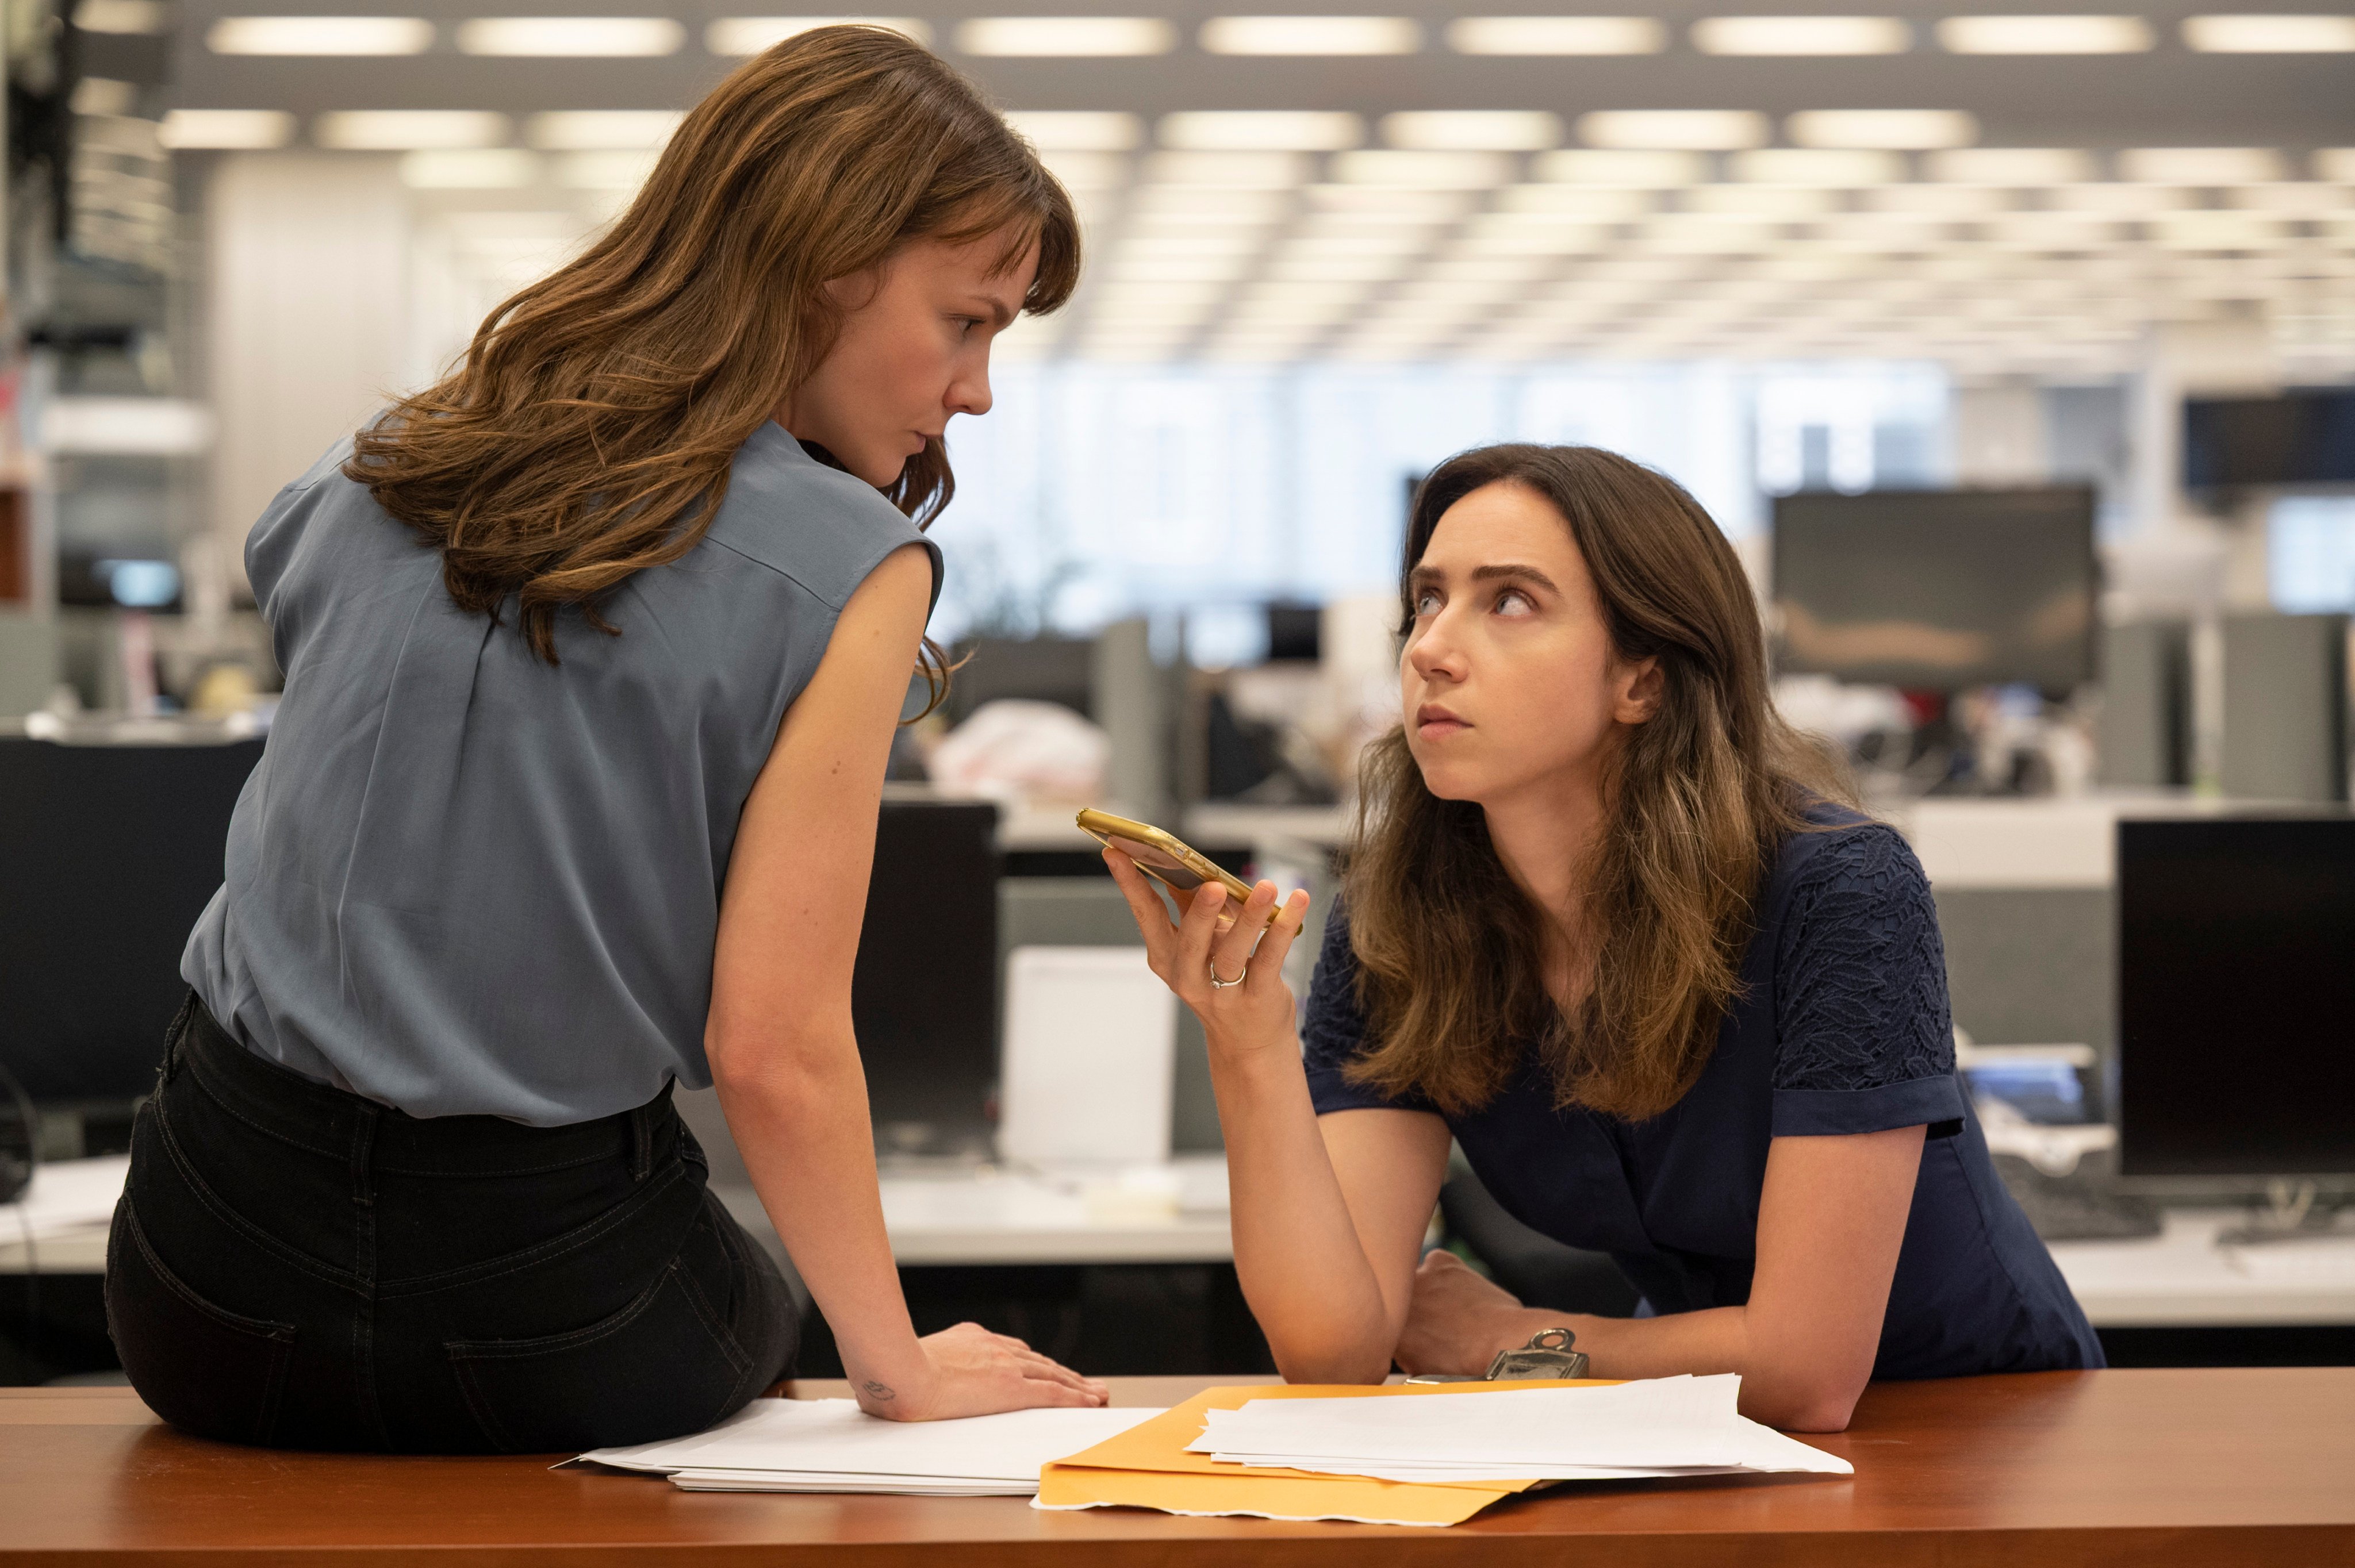 Carey Mulligan (left) as Megan Twohey and Zoe Kazan as Jodi Kantor in a still from She Said, about the Harvey Weinstein sexual harassment scandal.